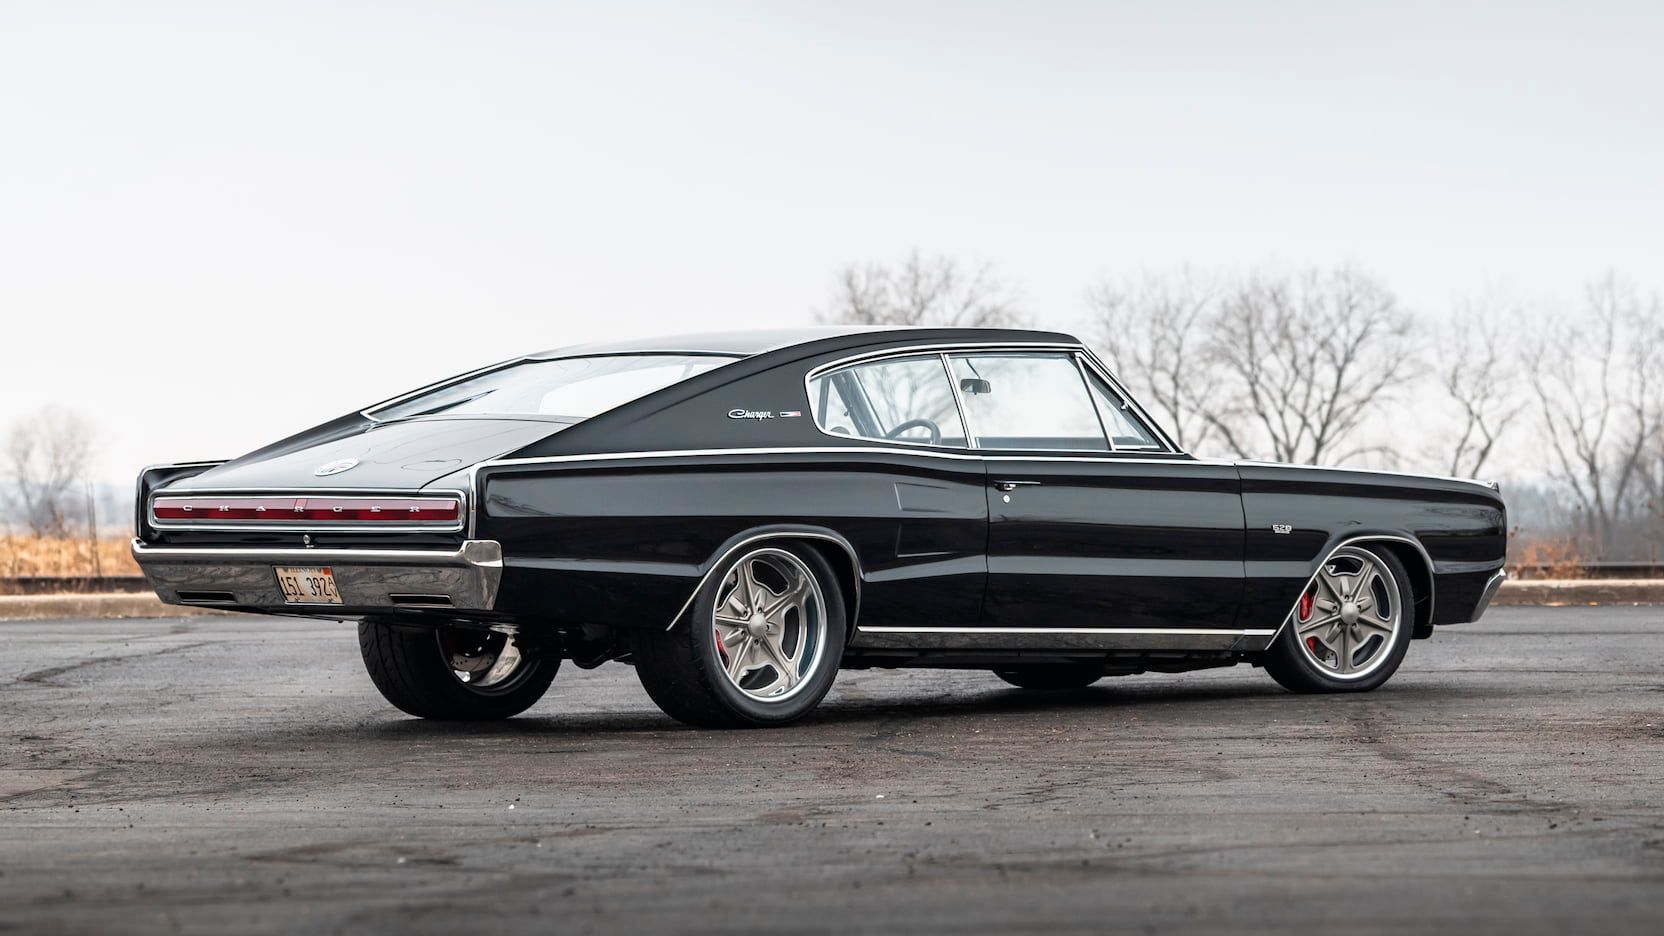 1967 Dodge Charger rear end